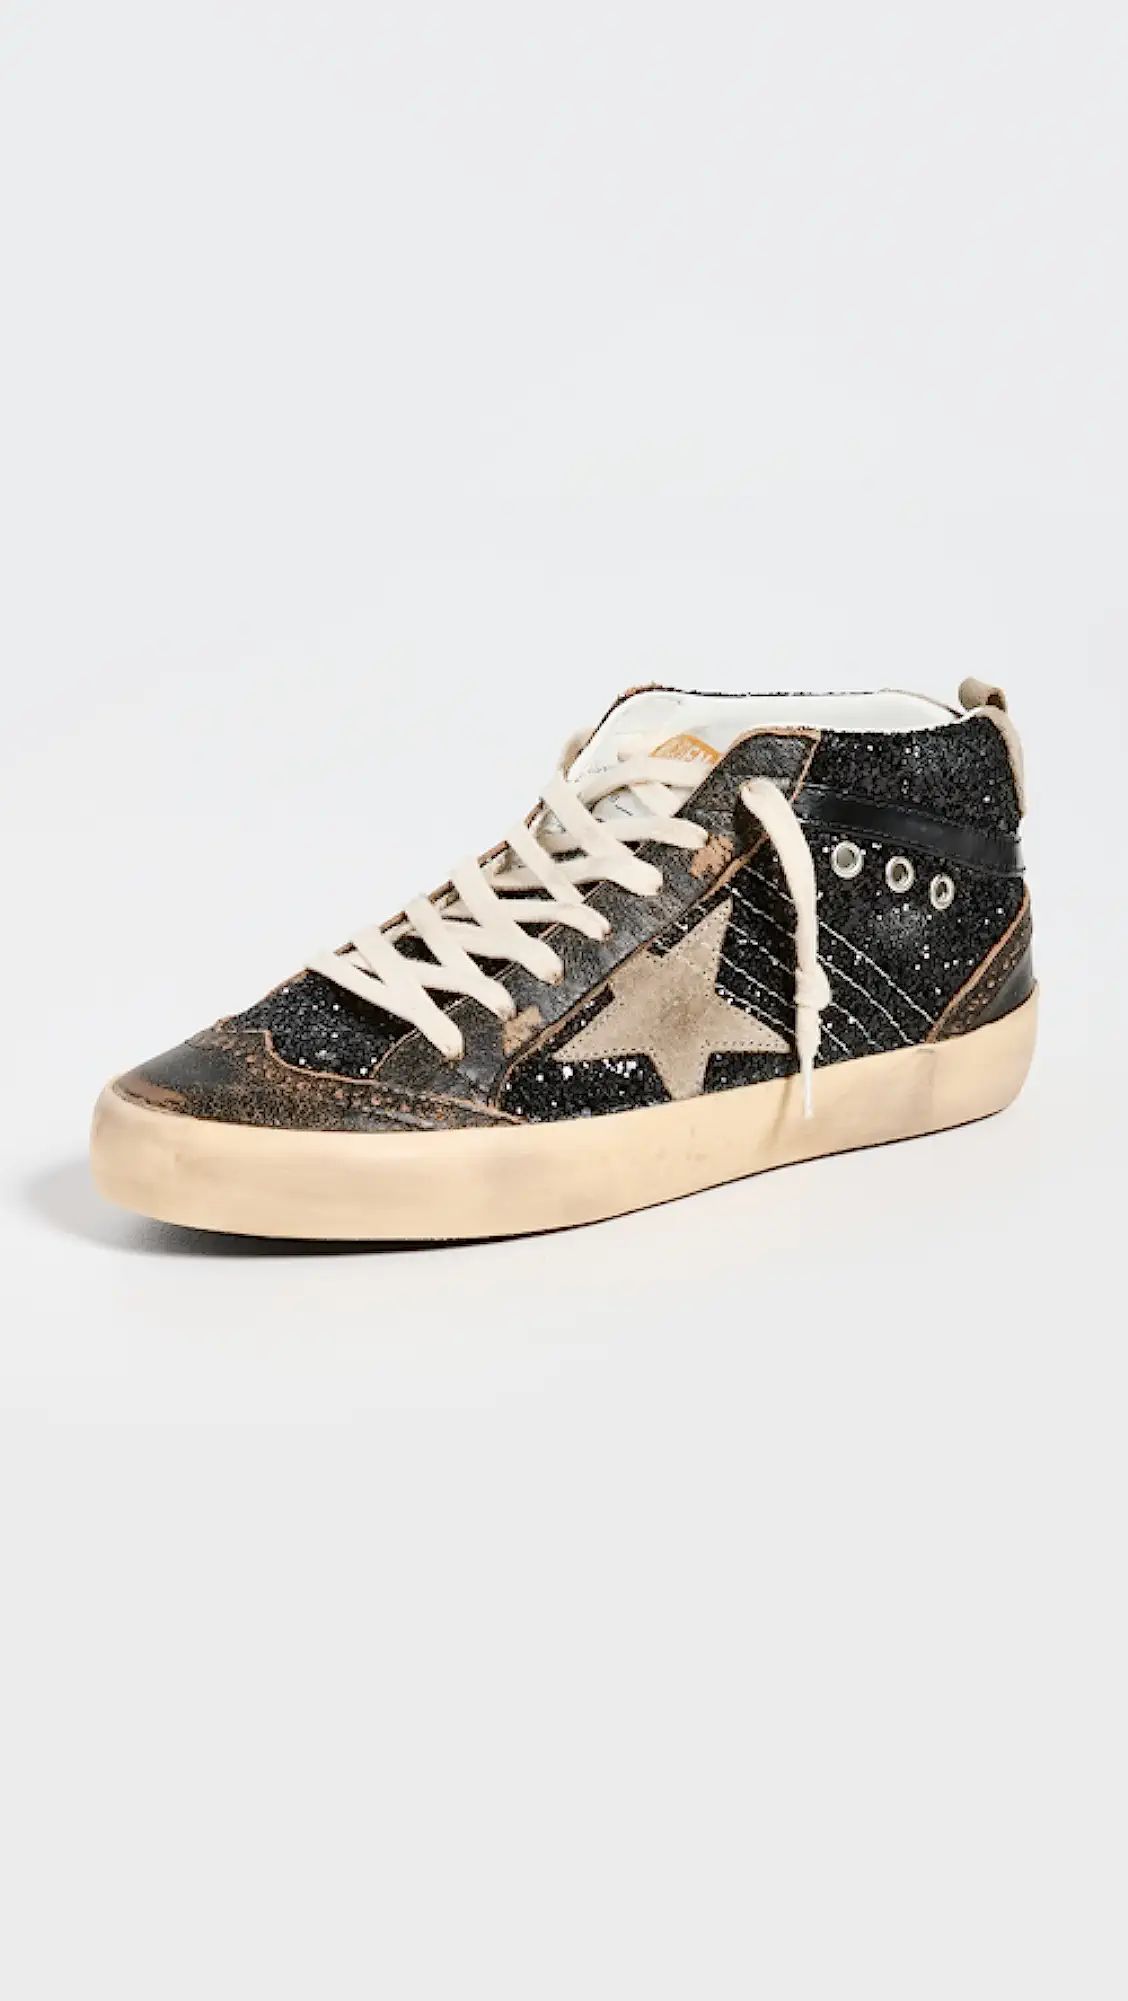 Mid Star Glitter Upper Shiny Leather Toe Sneakers | Shopbop